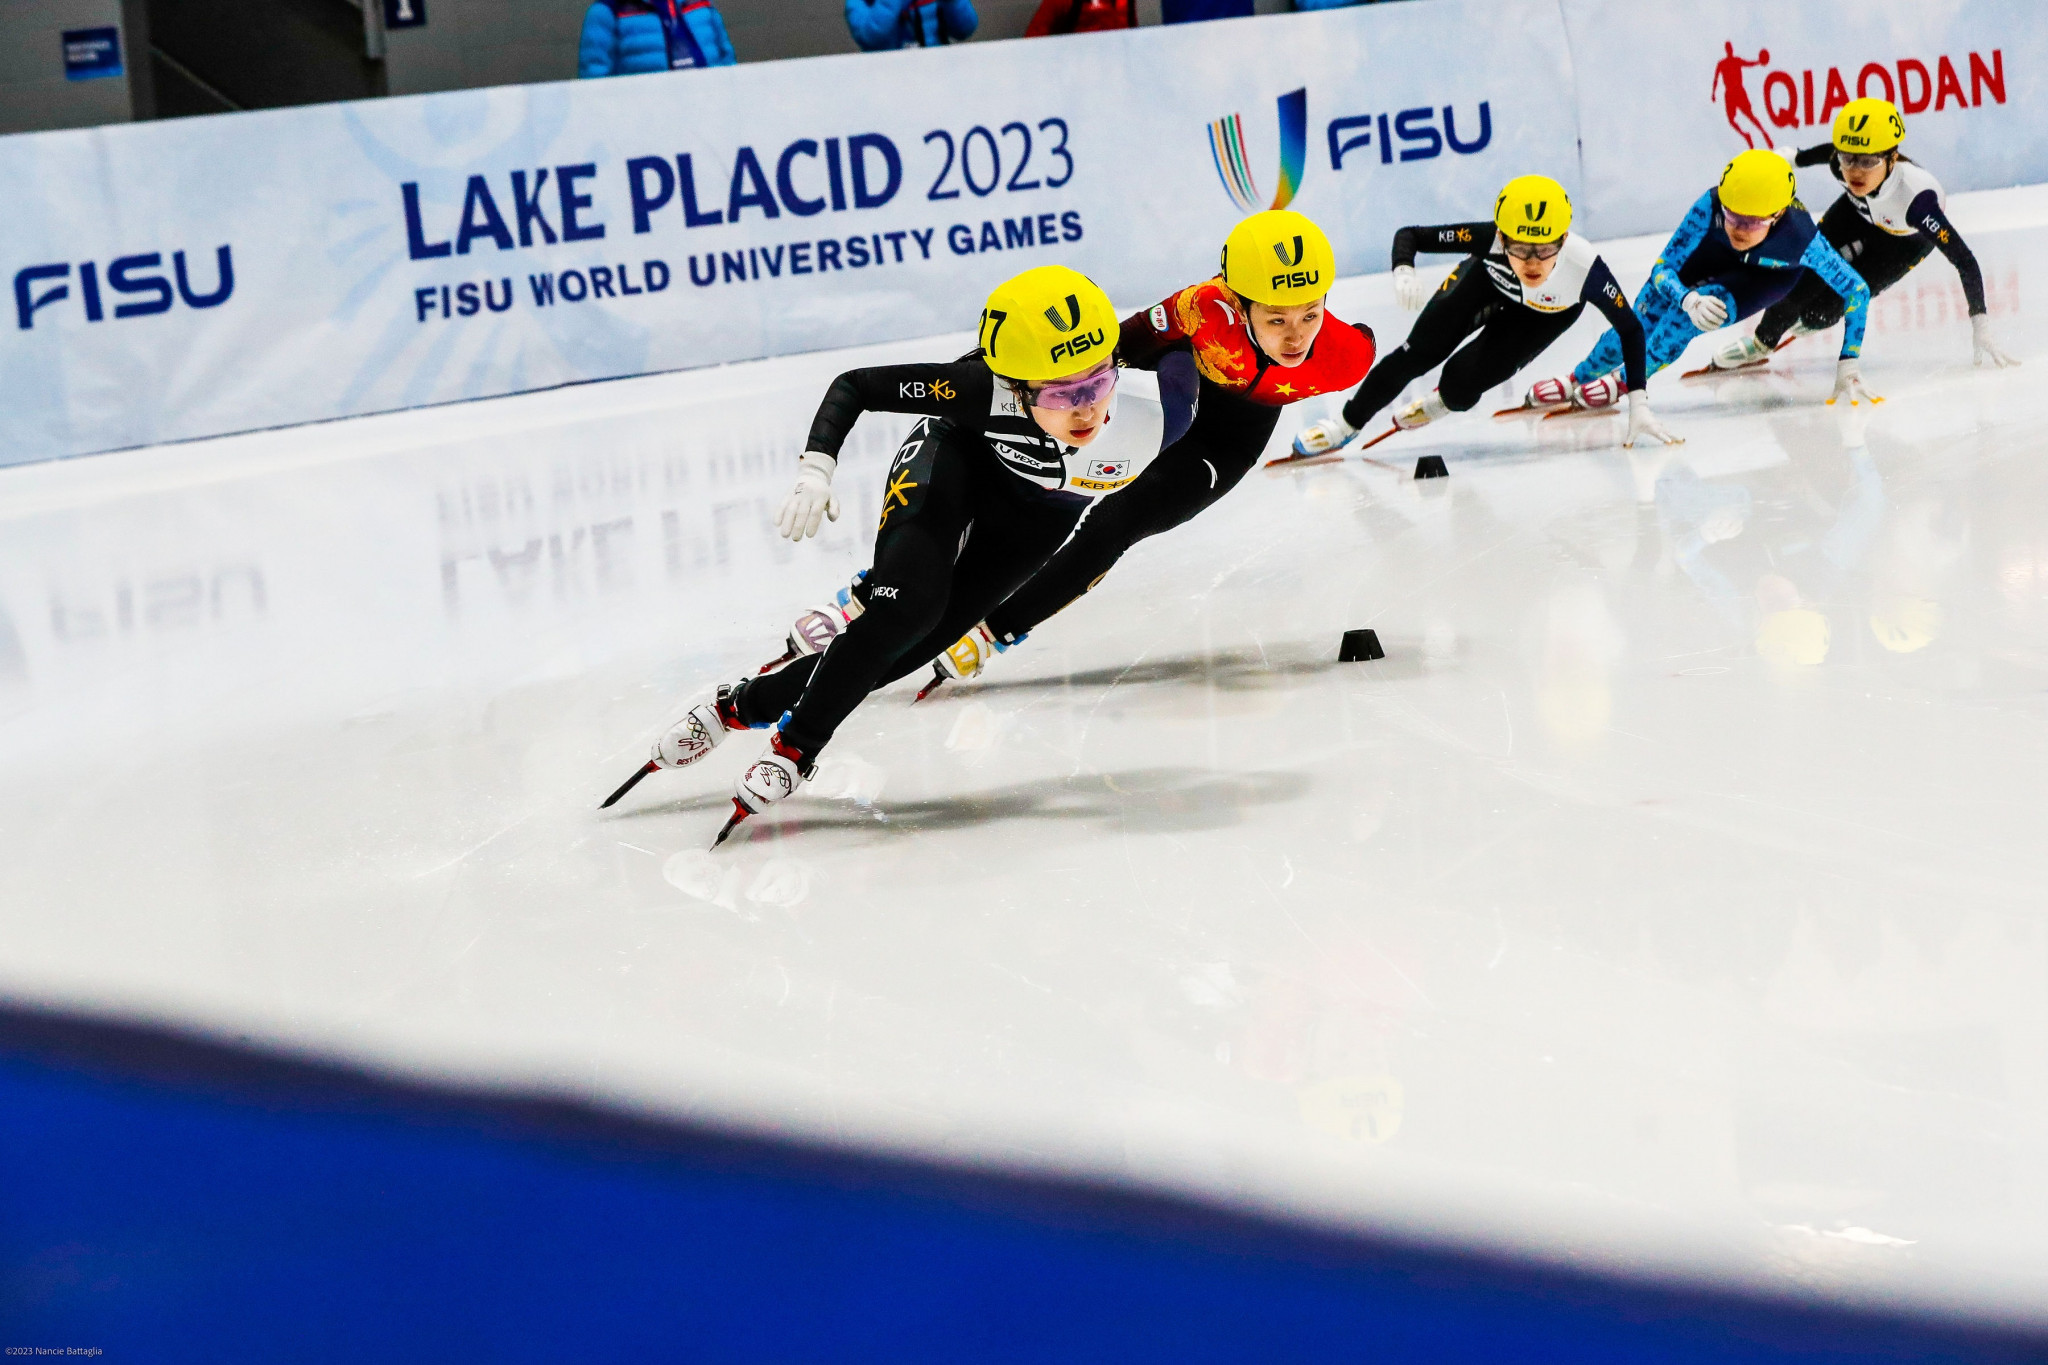 Lake Placid has expressed its interest in hosting the 2028 Winter Youth Olympic Games after staging the FISU Winter World University Games ©FISU